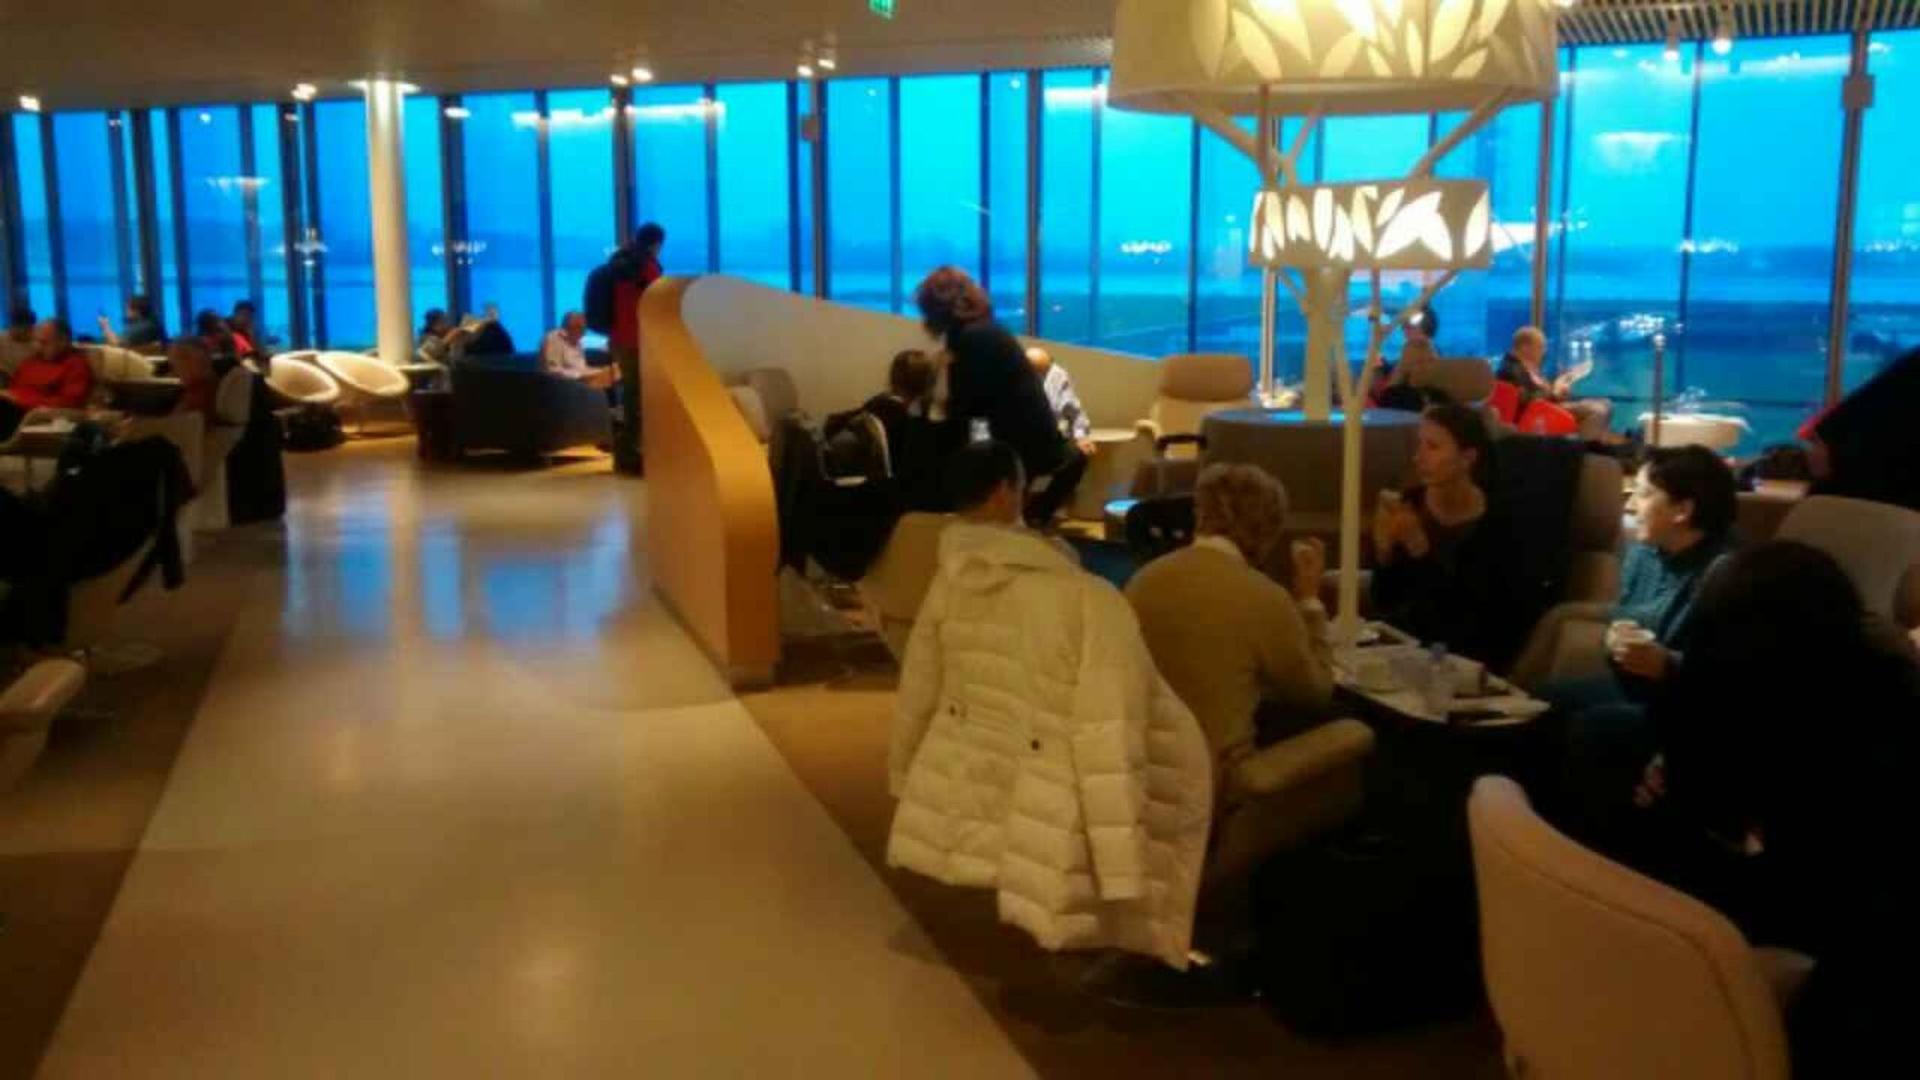 Air France Lounge (Concourse M) image 5 of 17